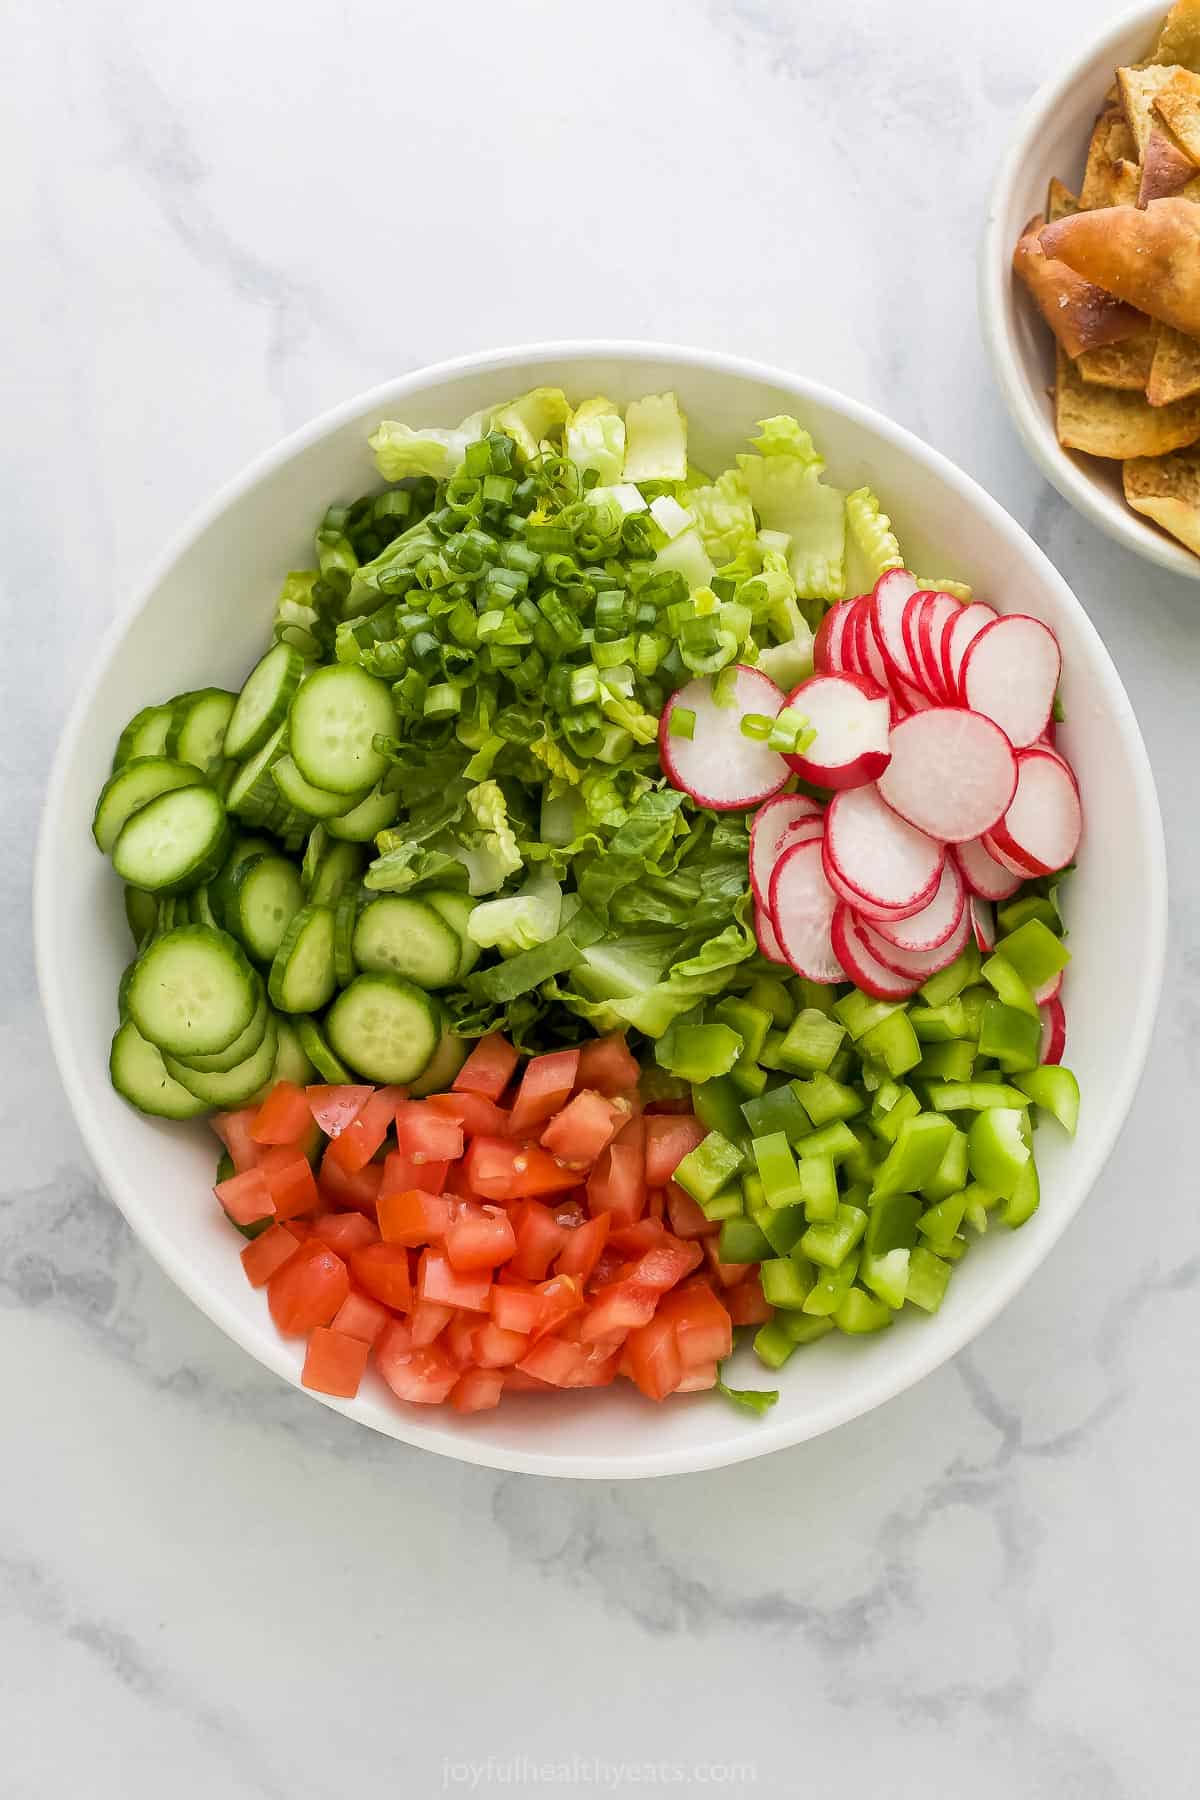 All of the prepared salad veggies in a white mixing bowl